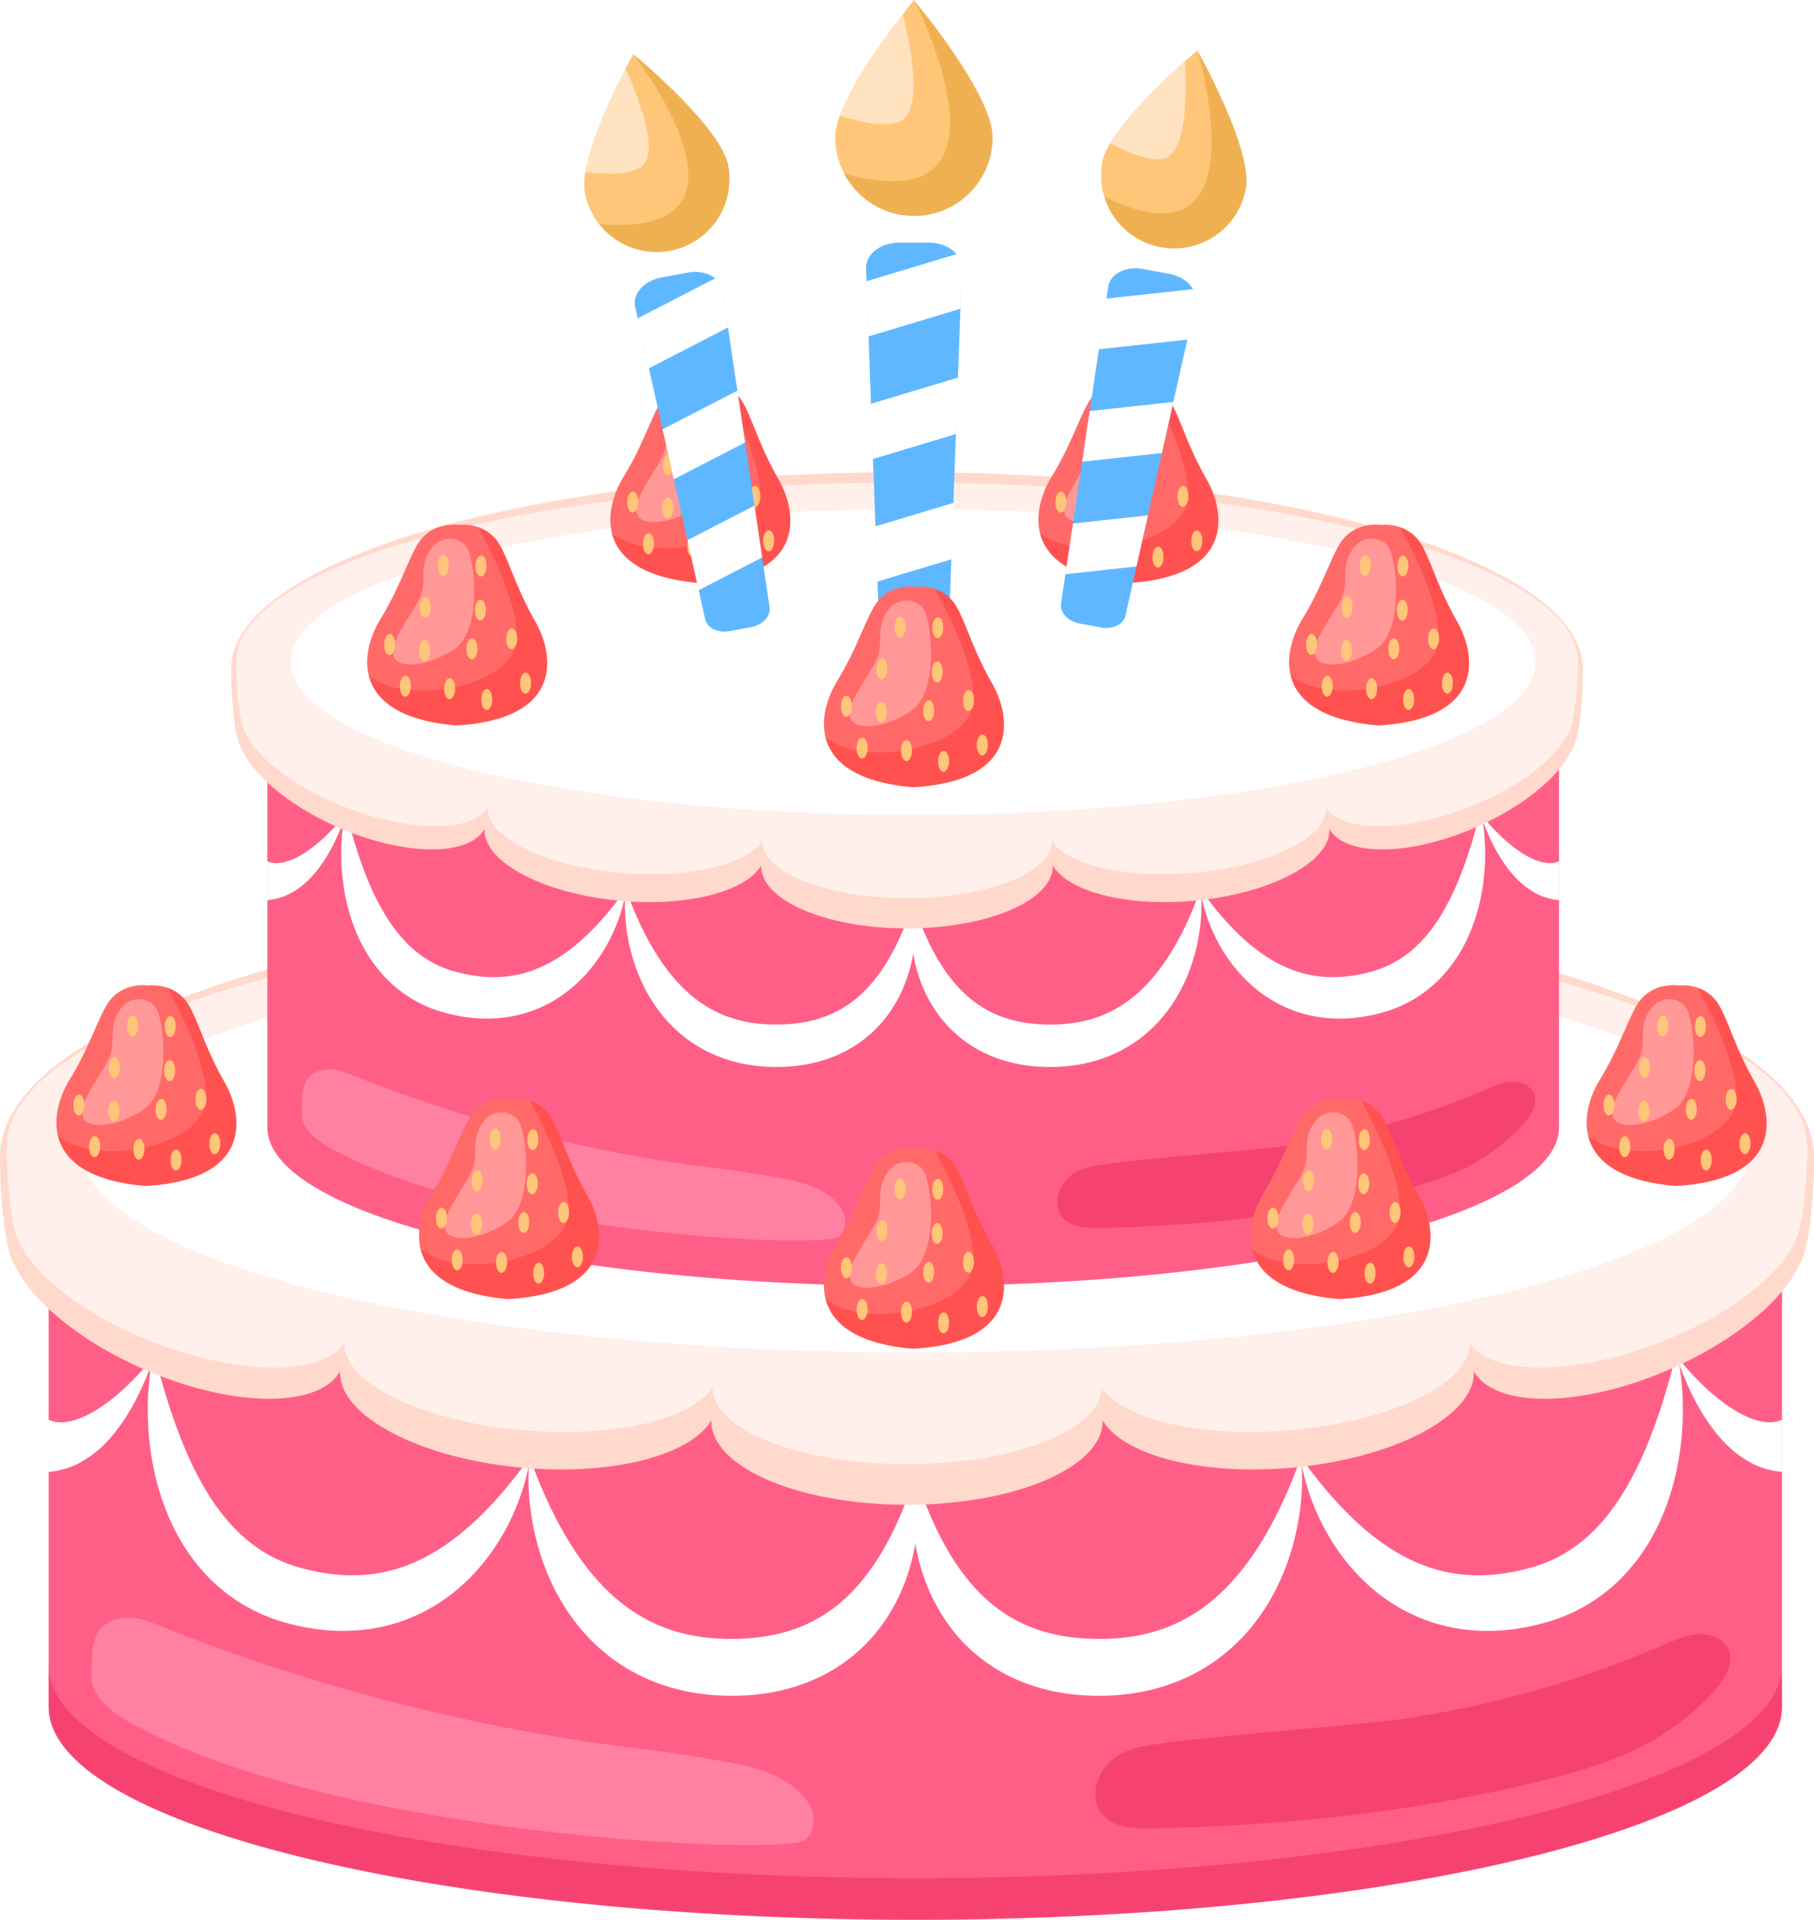 Birthday Cake With Candles Illustration 36273132 PNG